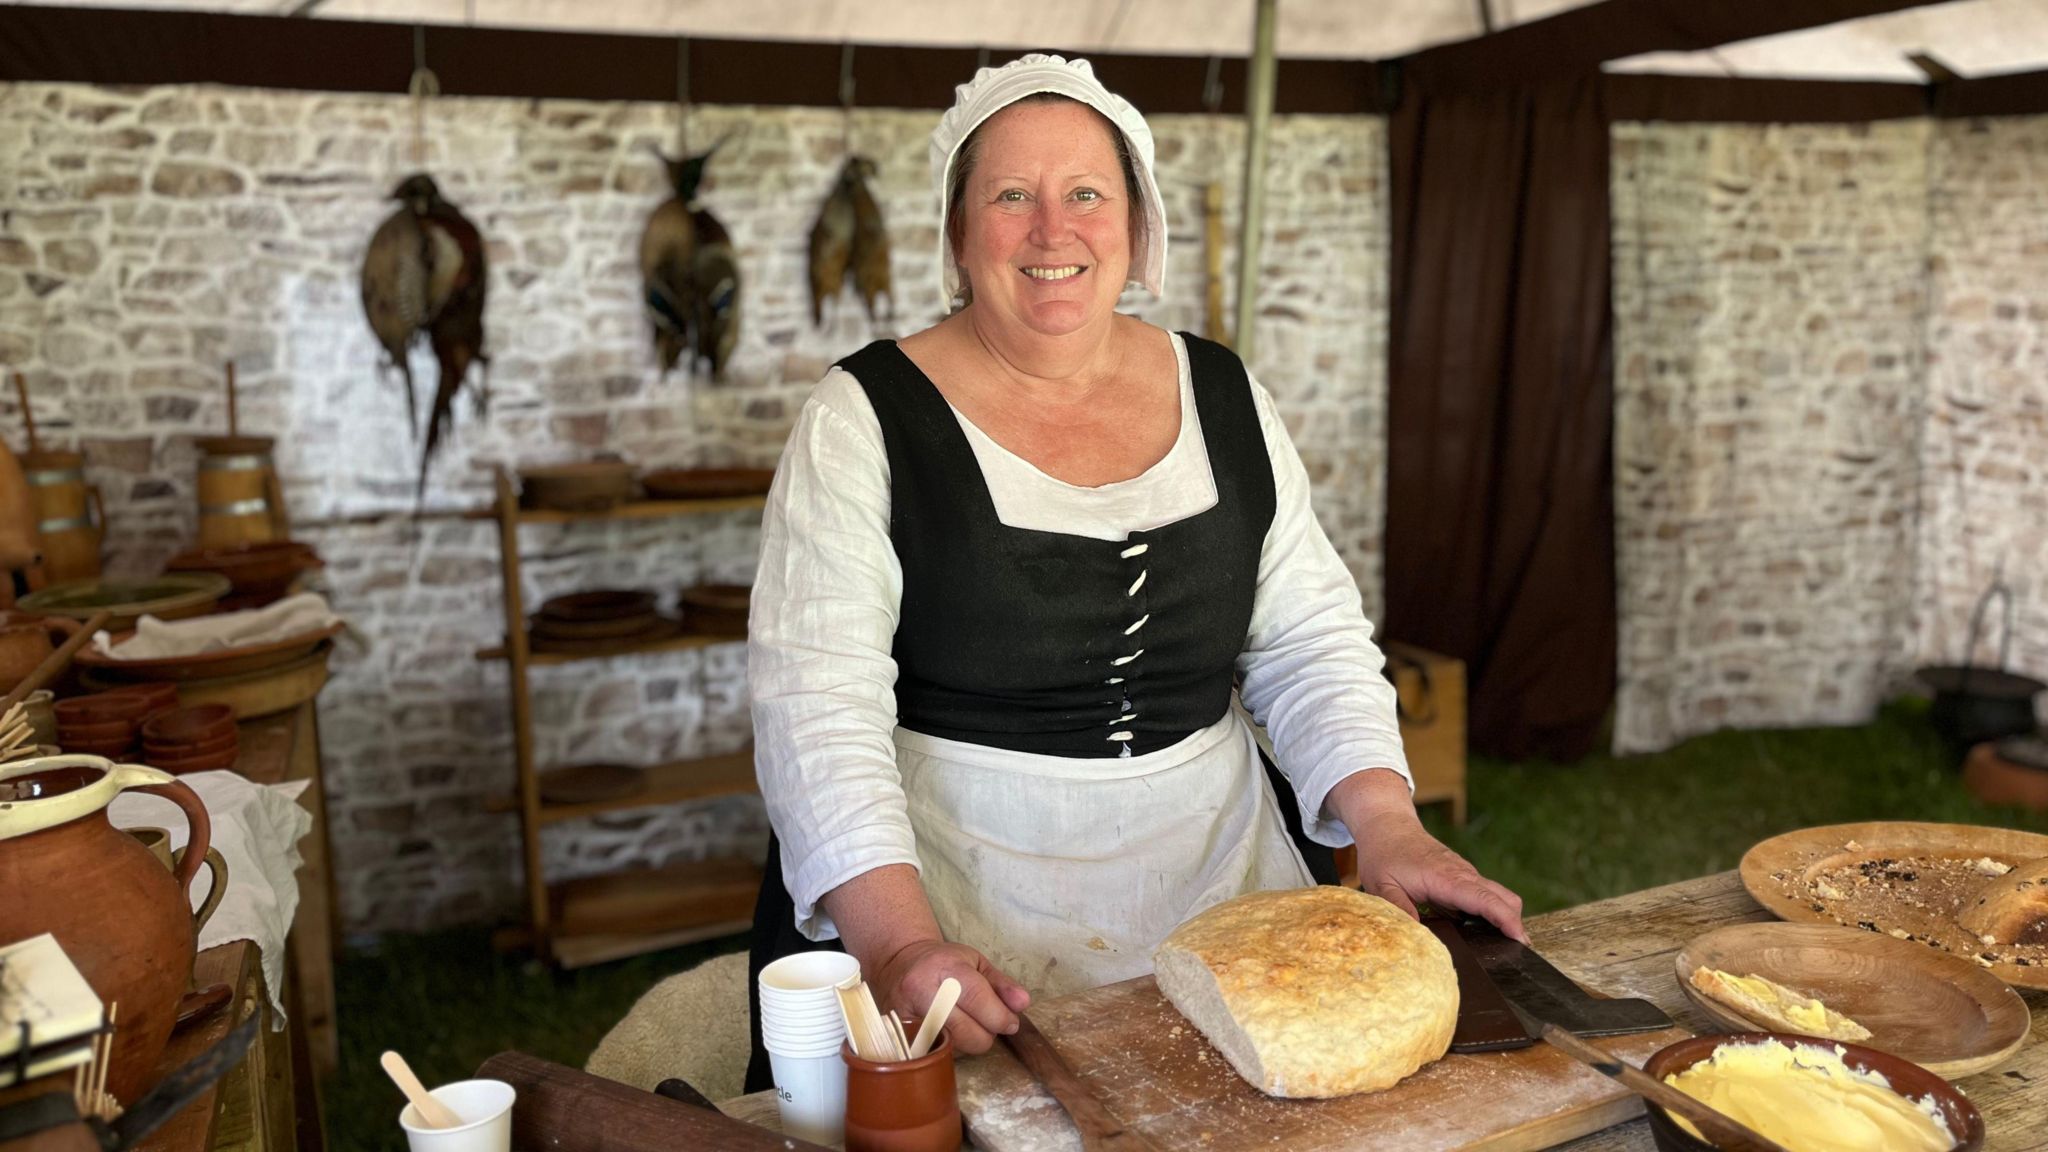 Tracey Grand looks into the camera dressed as Tudor cook with a fresh loaf of bread surrounded by historical cookware